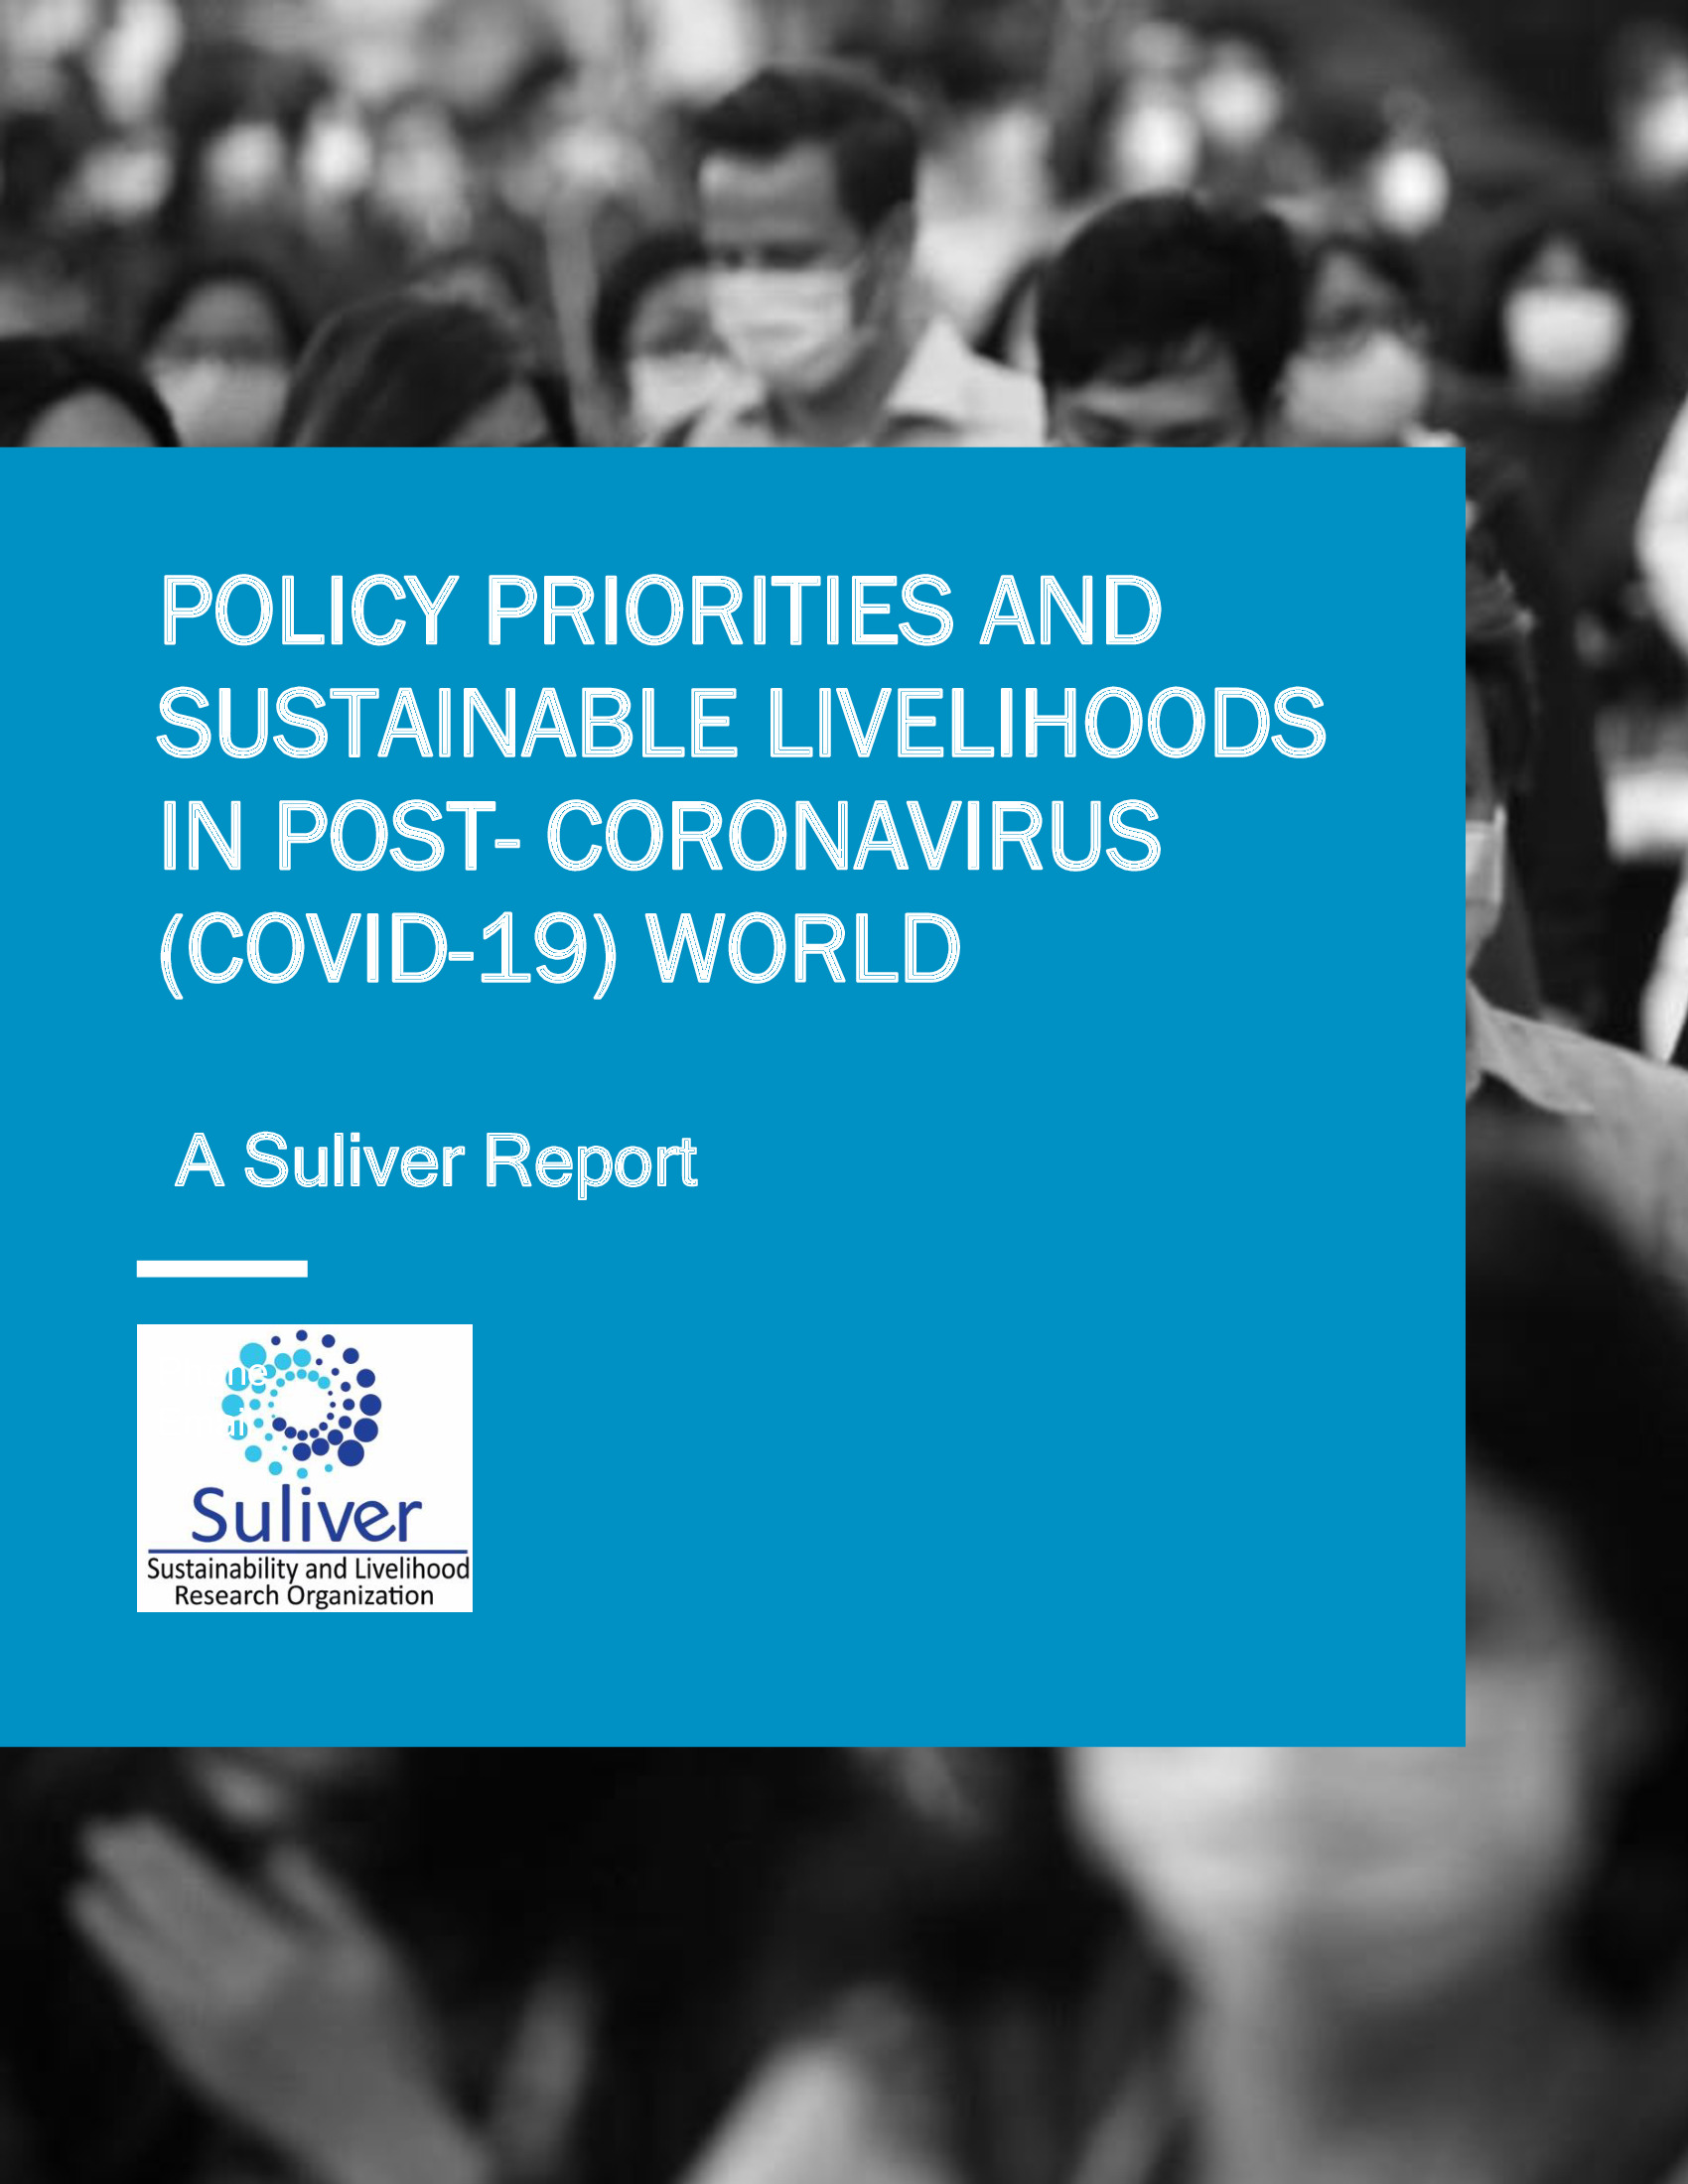 POLICY PRIORITIES AND SUSTAINABLE LIVELIHOODS IN POST- CORONAVIRUS (COVID-19) WORLD REPORT – SULIVER